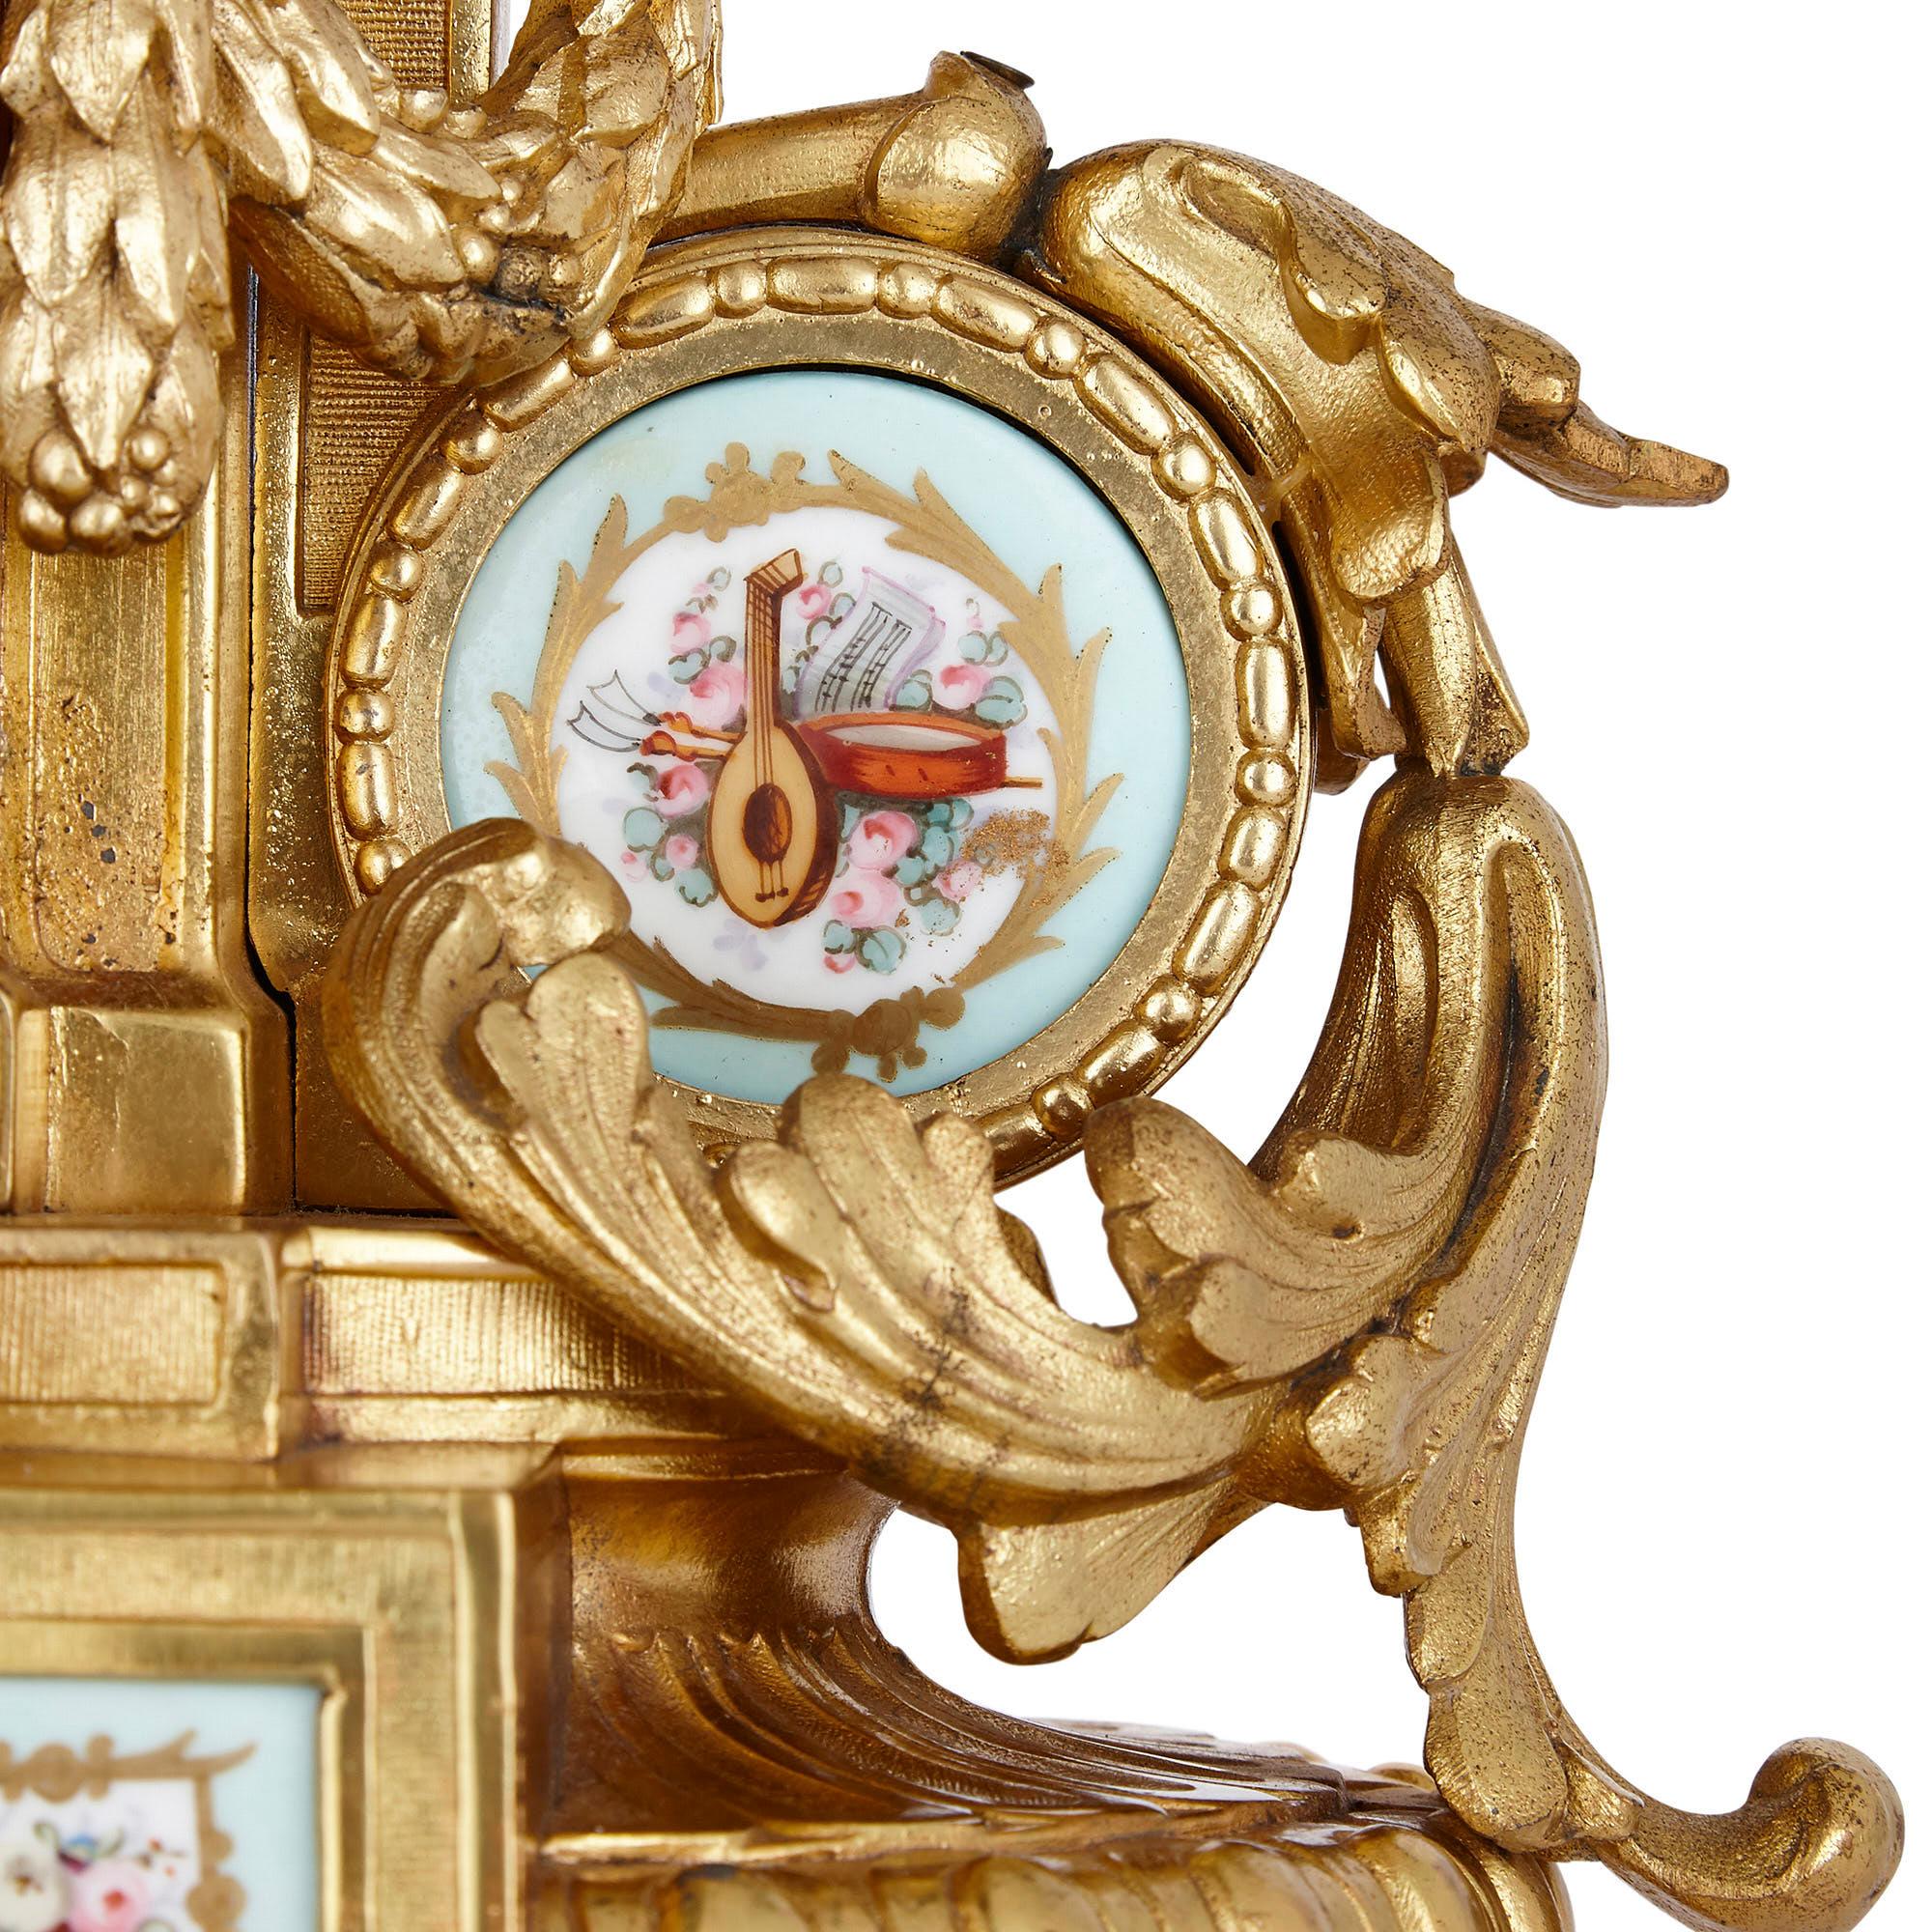 Rococo Style Gilt Bronze Mantel Clock with Sèvres Style Porcelain Plaques In Good Condition For Sale In London, GB